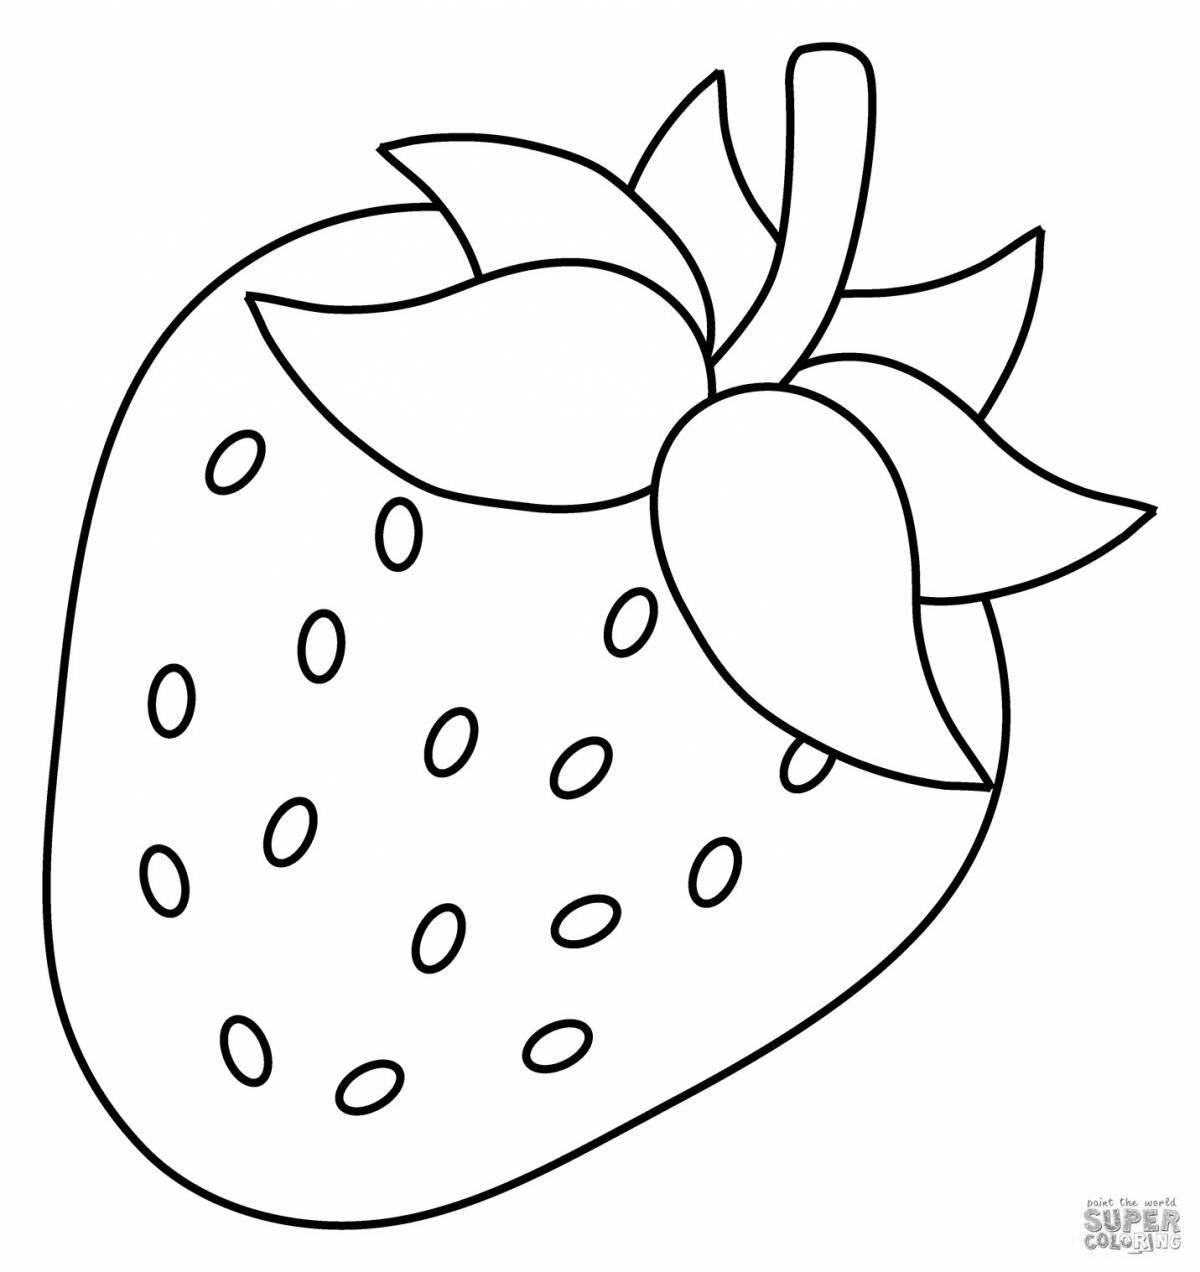 A fascinating strawberry coloring book for children 5-6 years old